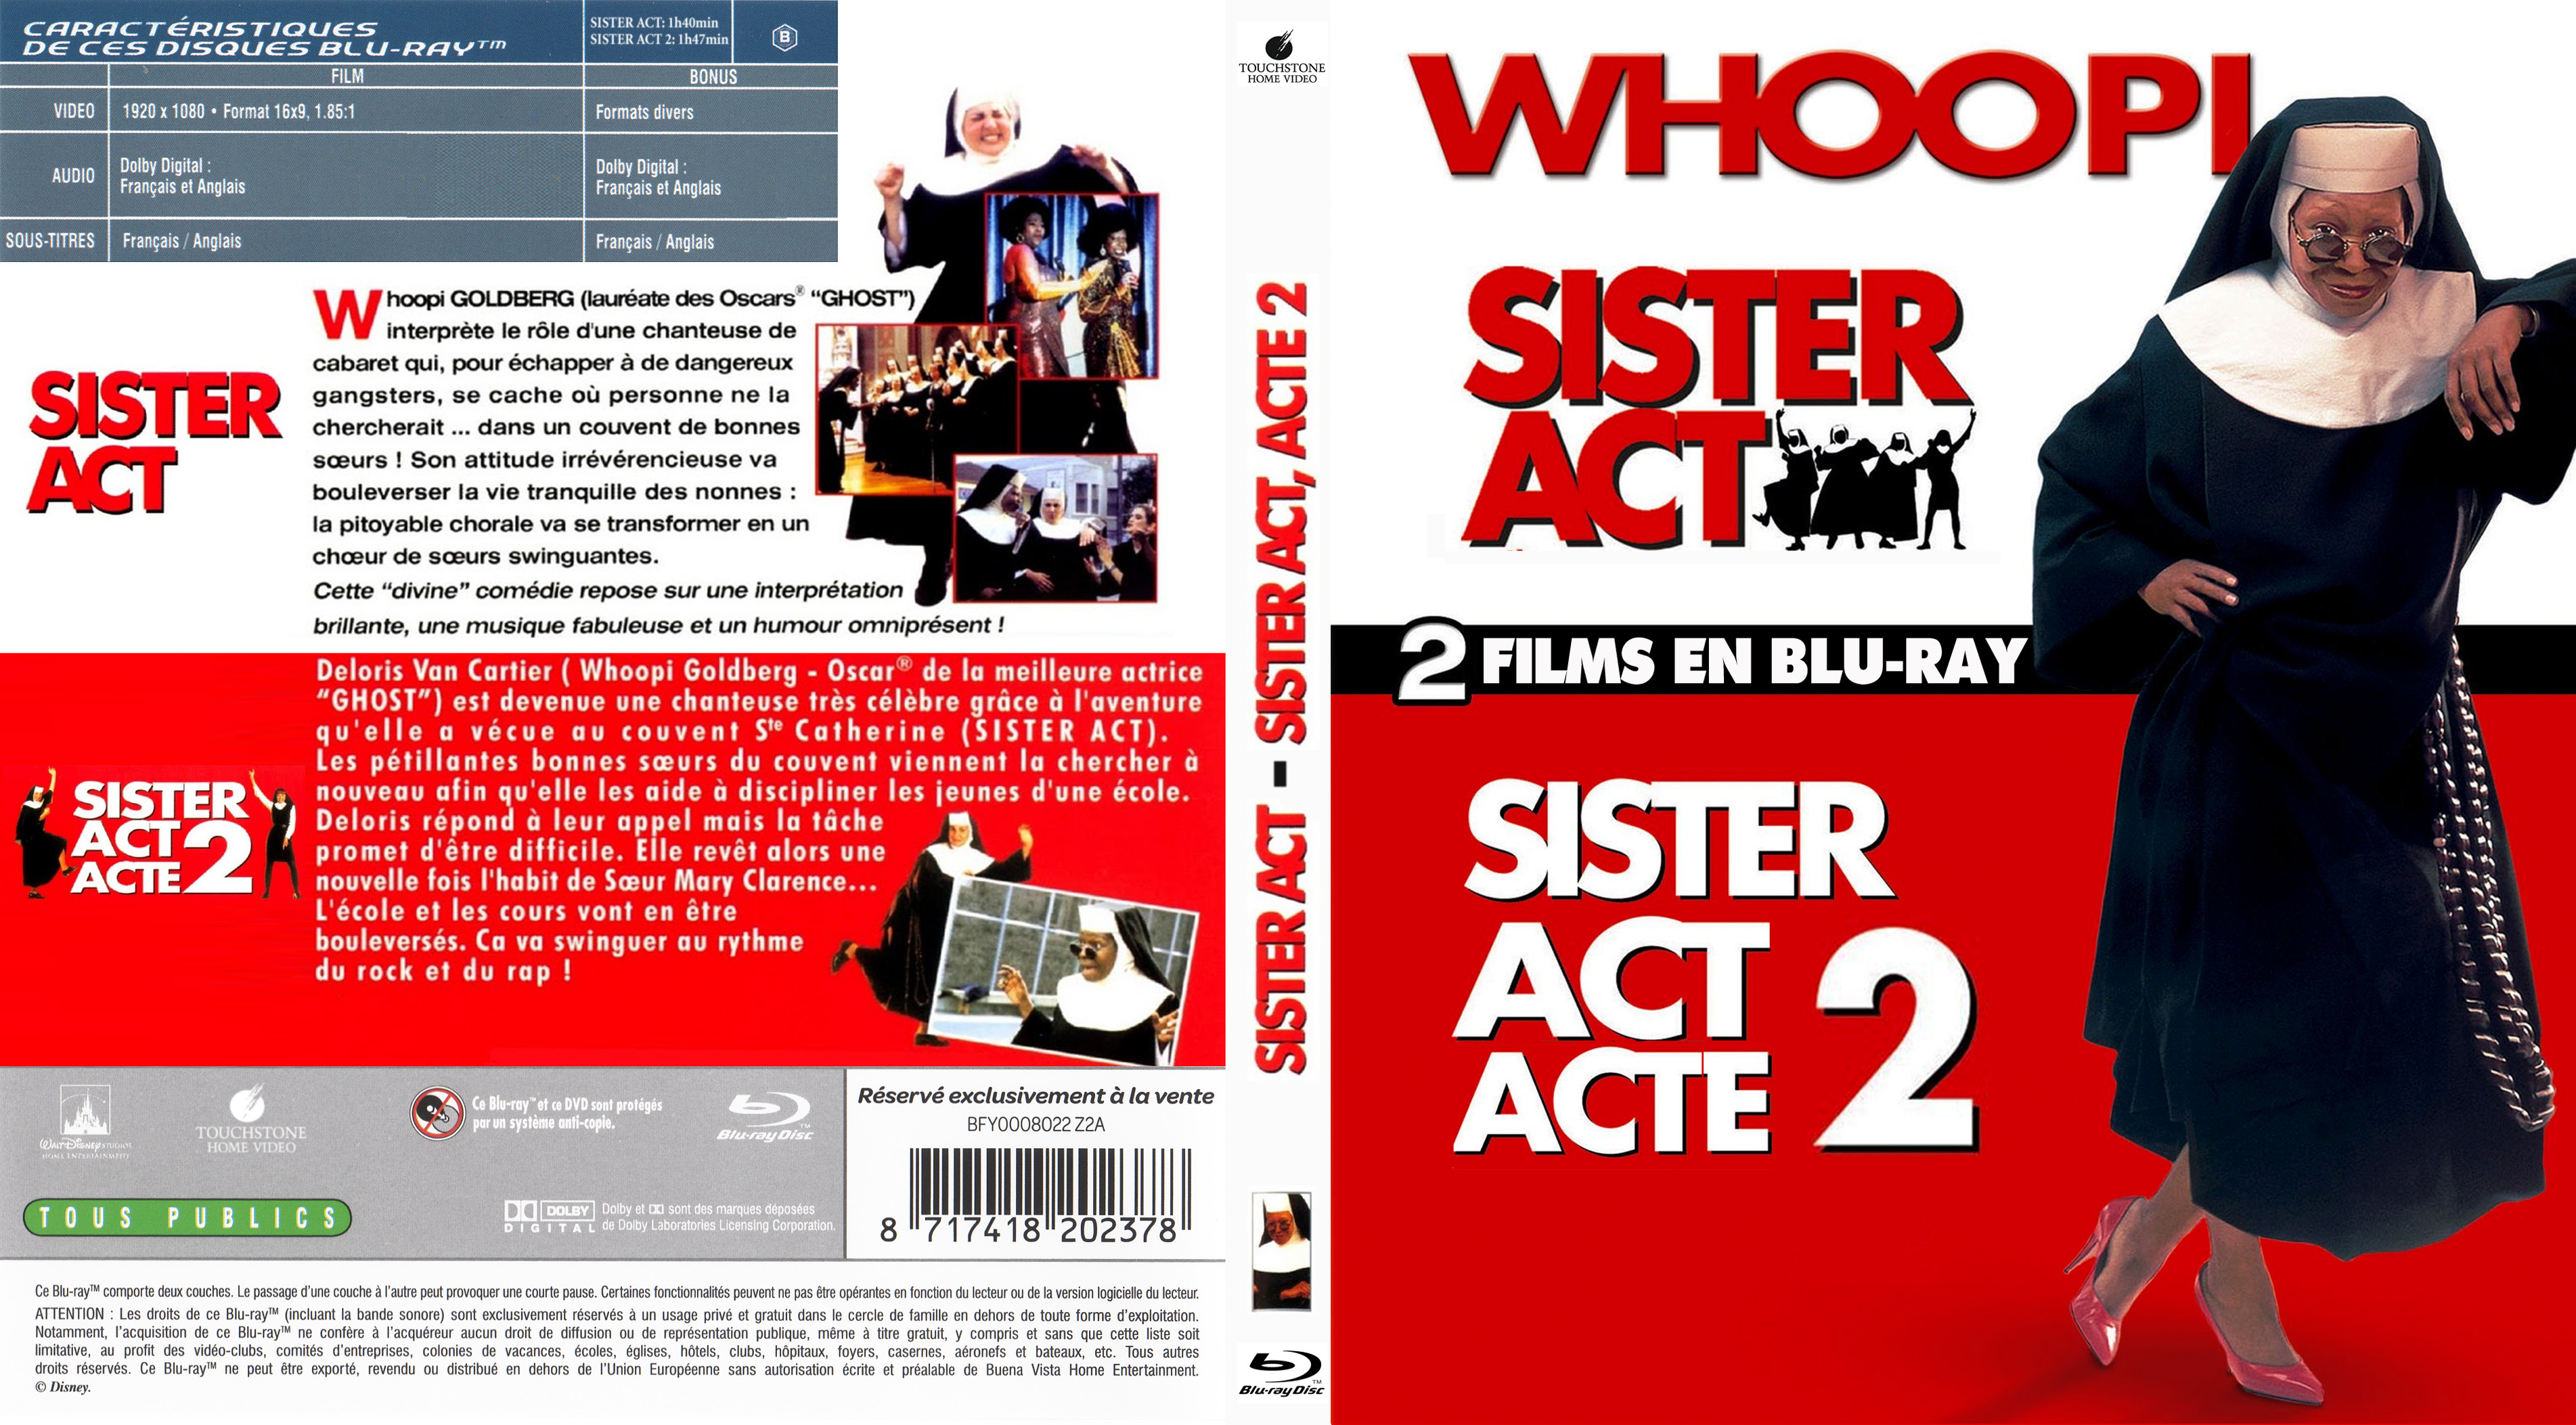 Jaquette DVD Sister act 1 et 2 (BLU-RAY) custom